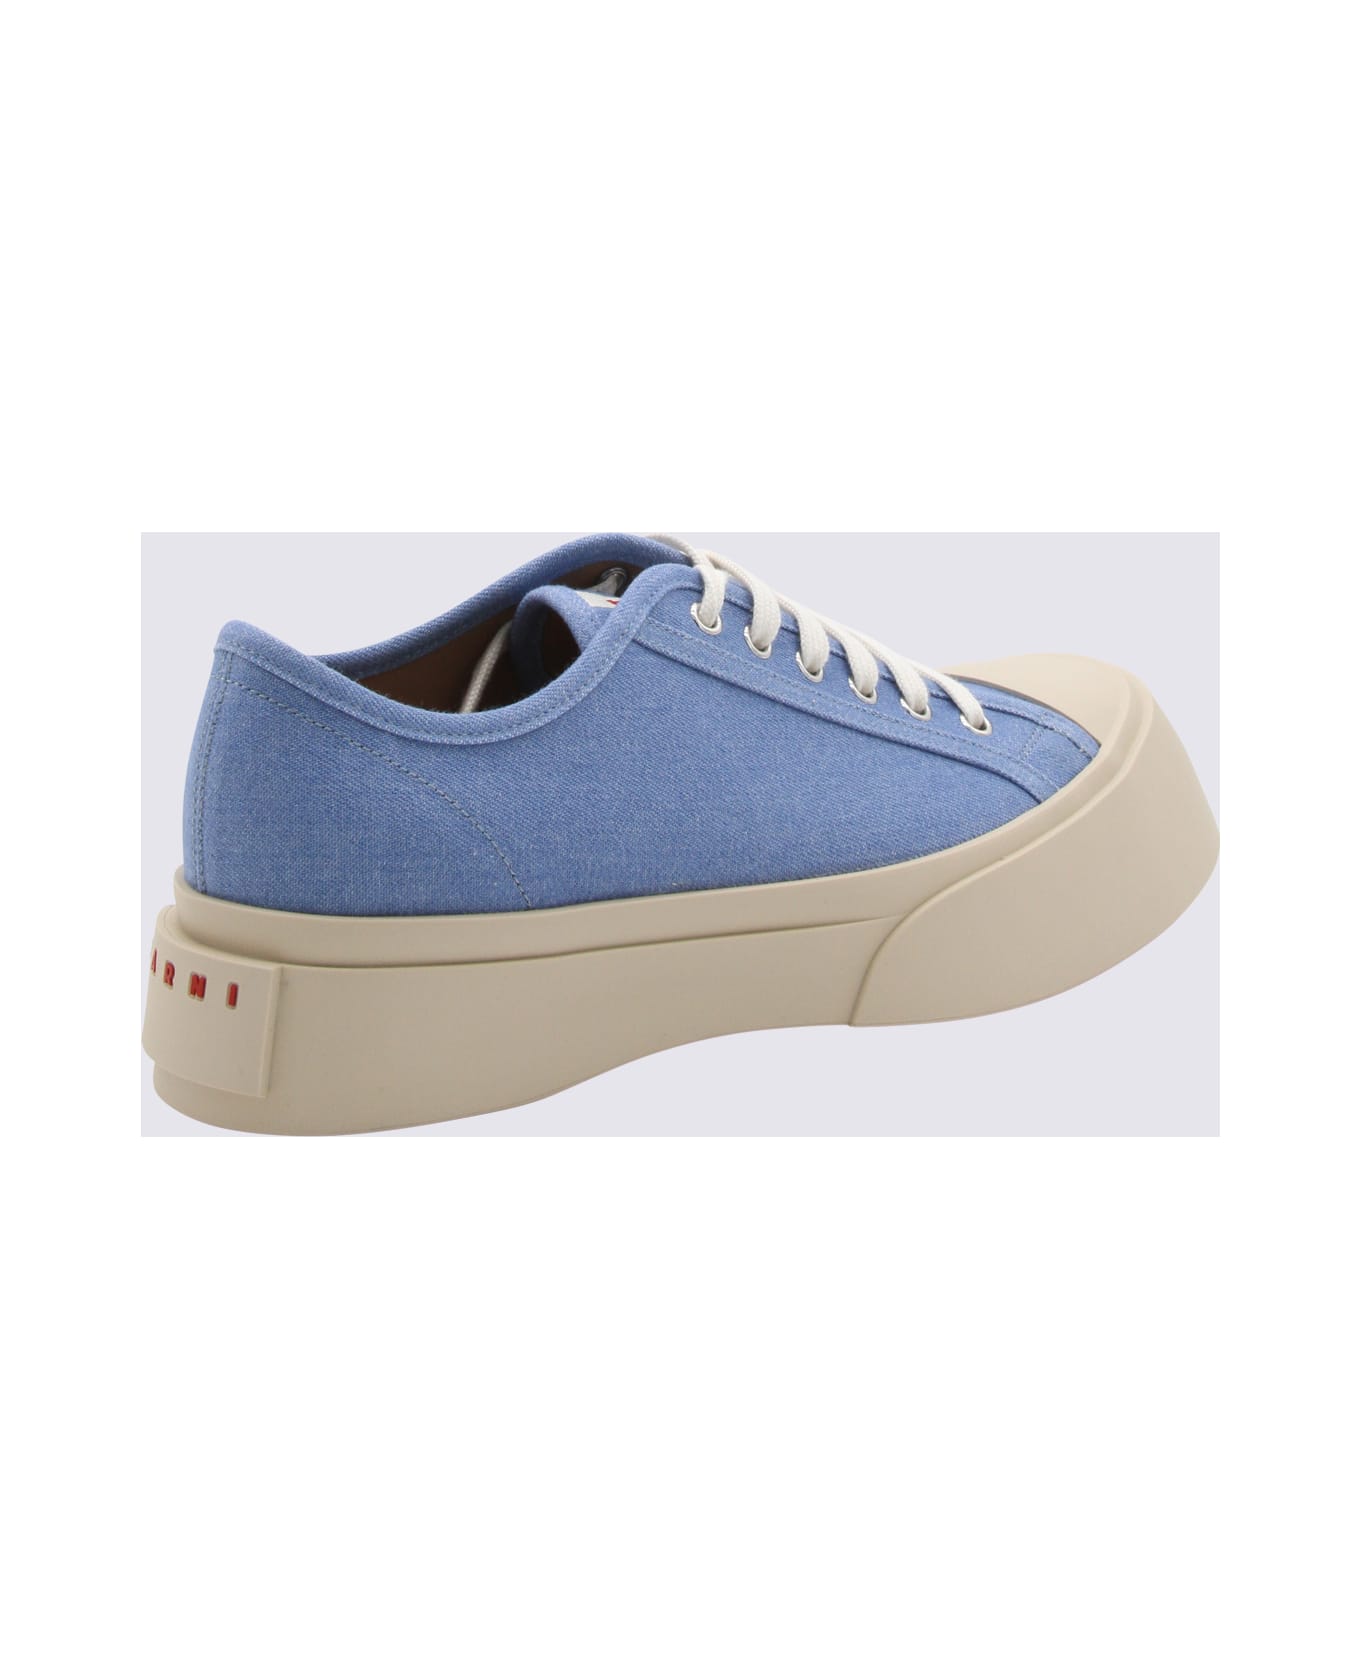 Marni Light Blue Leather Sneakers - Blue